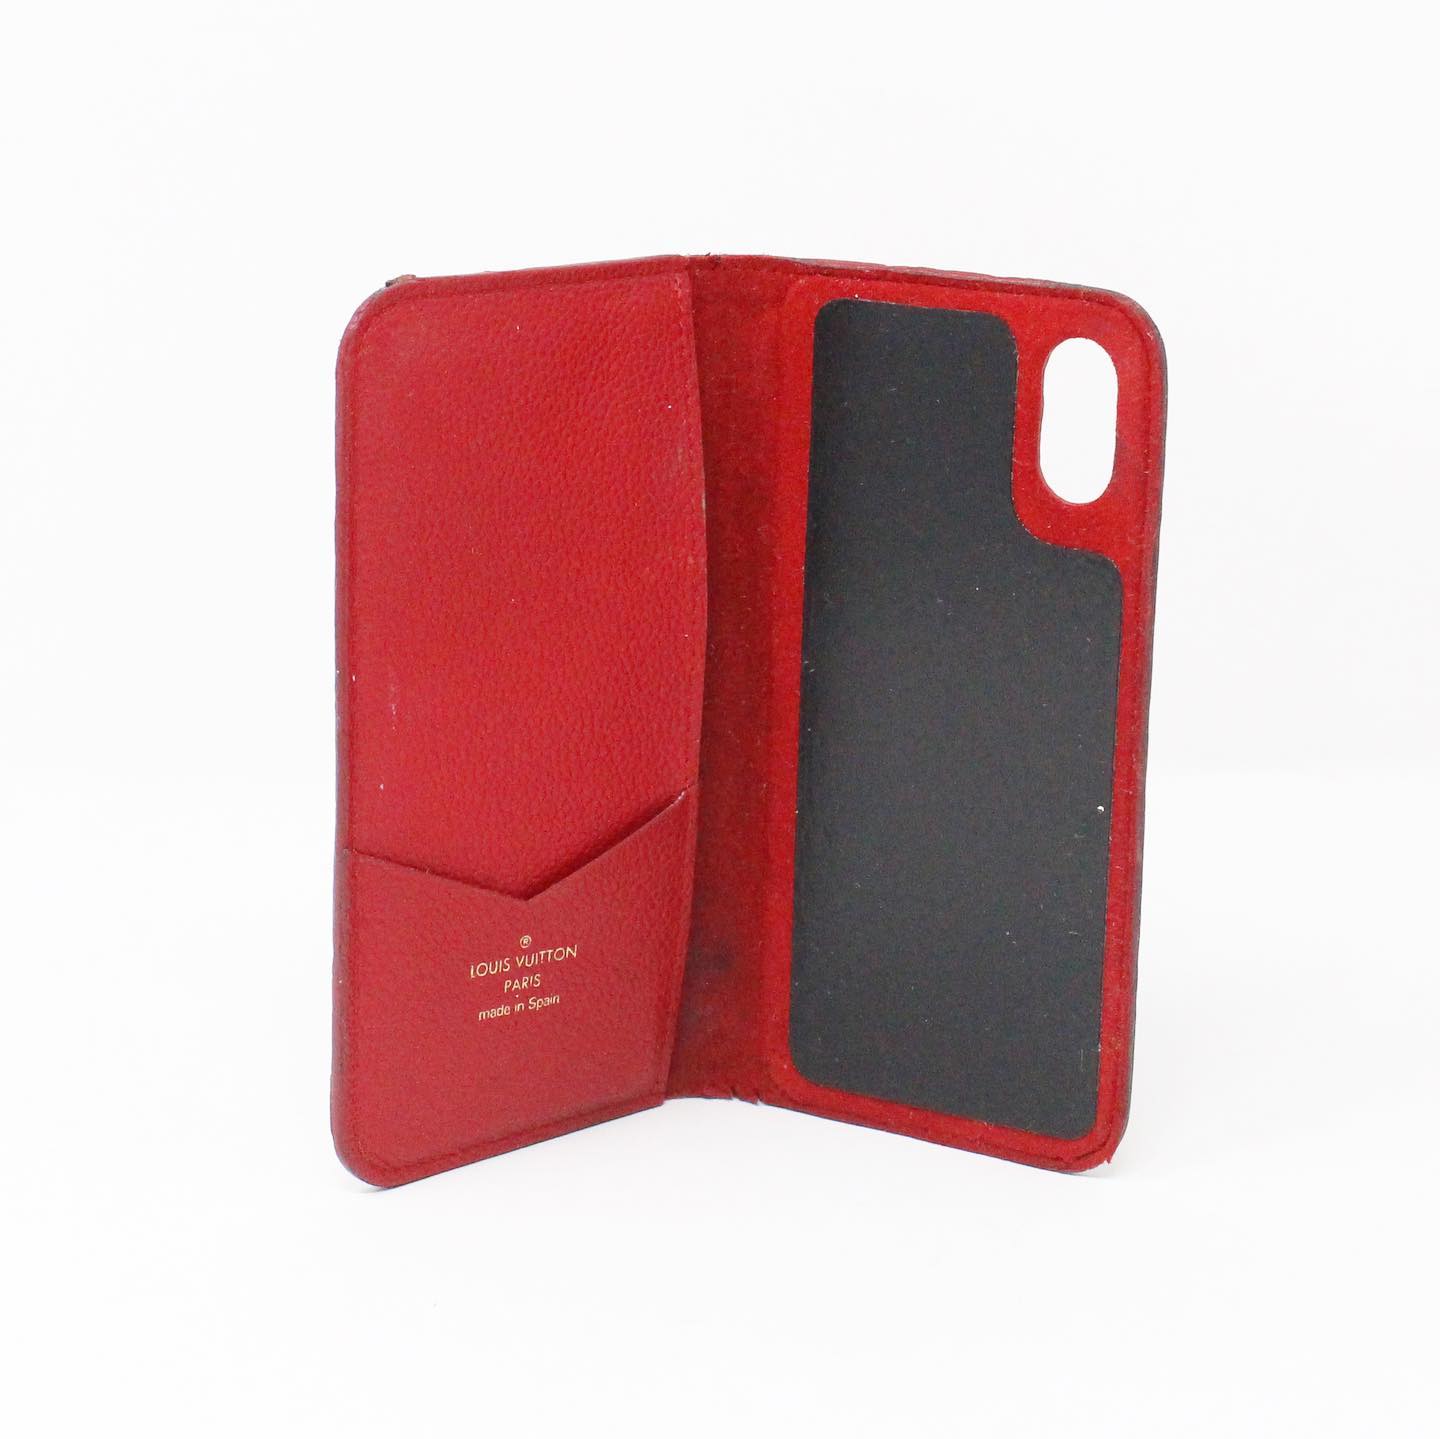 LOUIS VUITTON #31445 Red Empreinte Leather Phone Case (iPhone 11 – X, XS) –  ALL YOUR BLISS